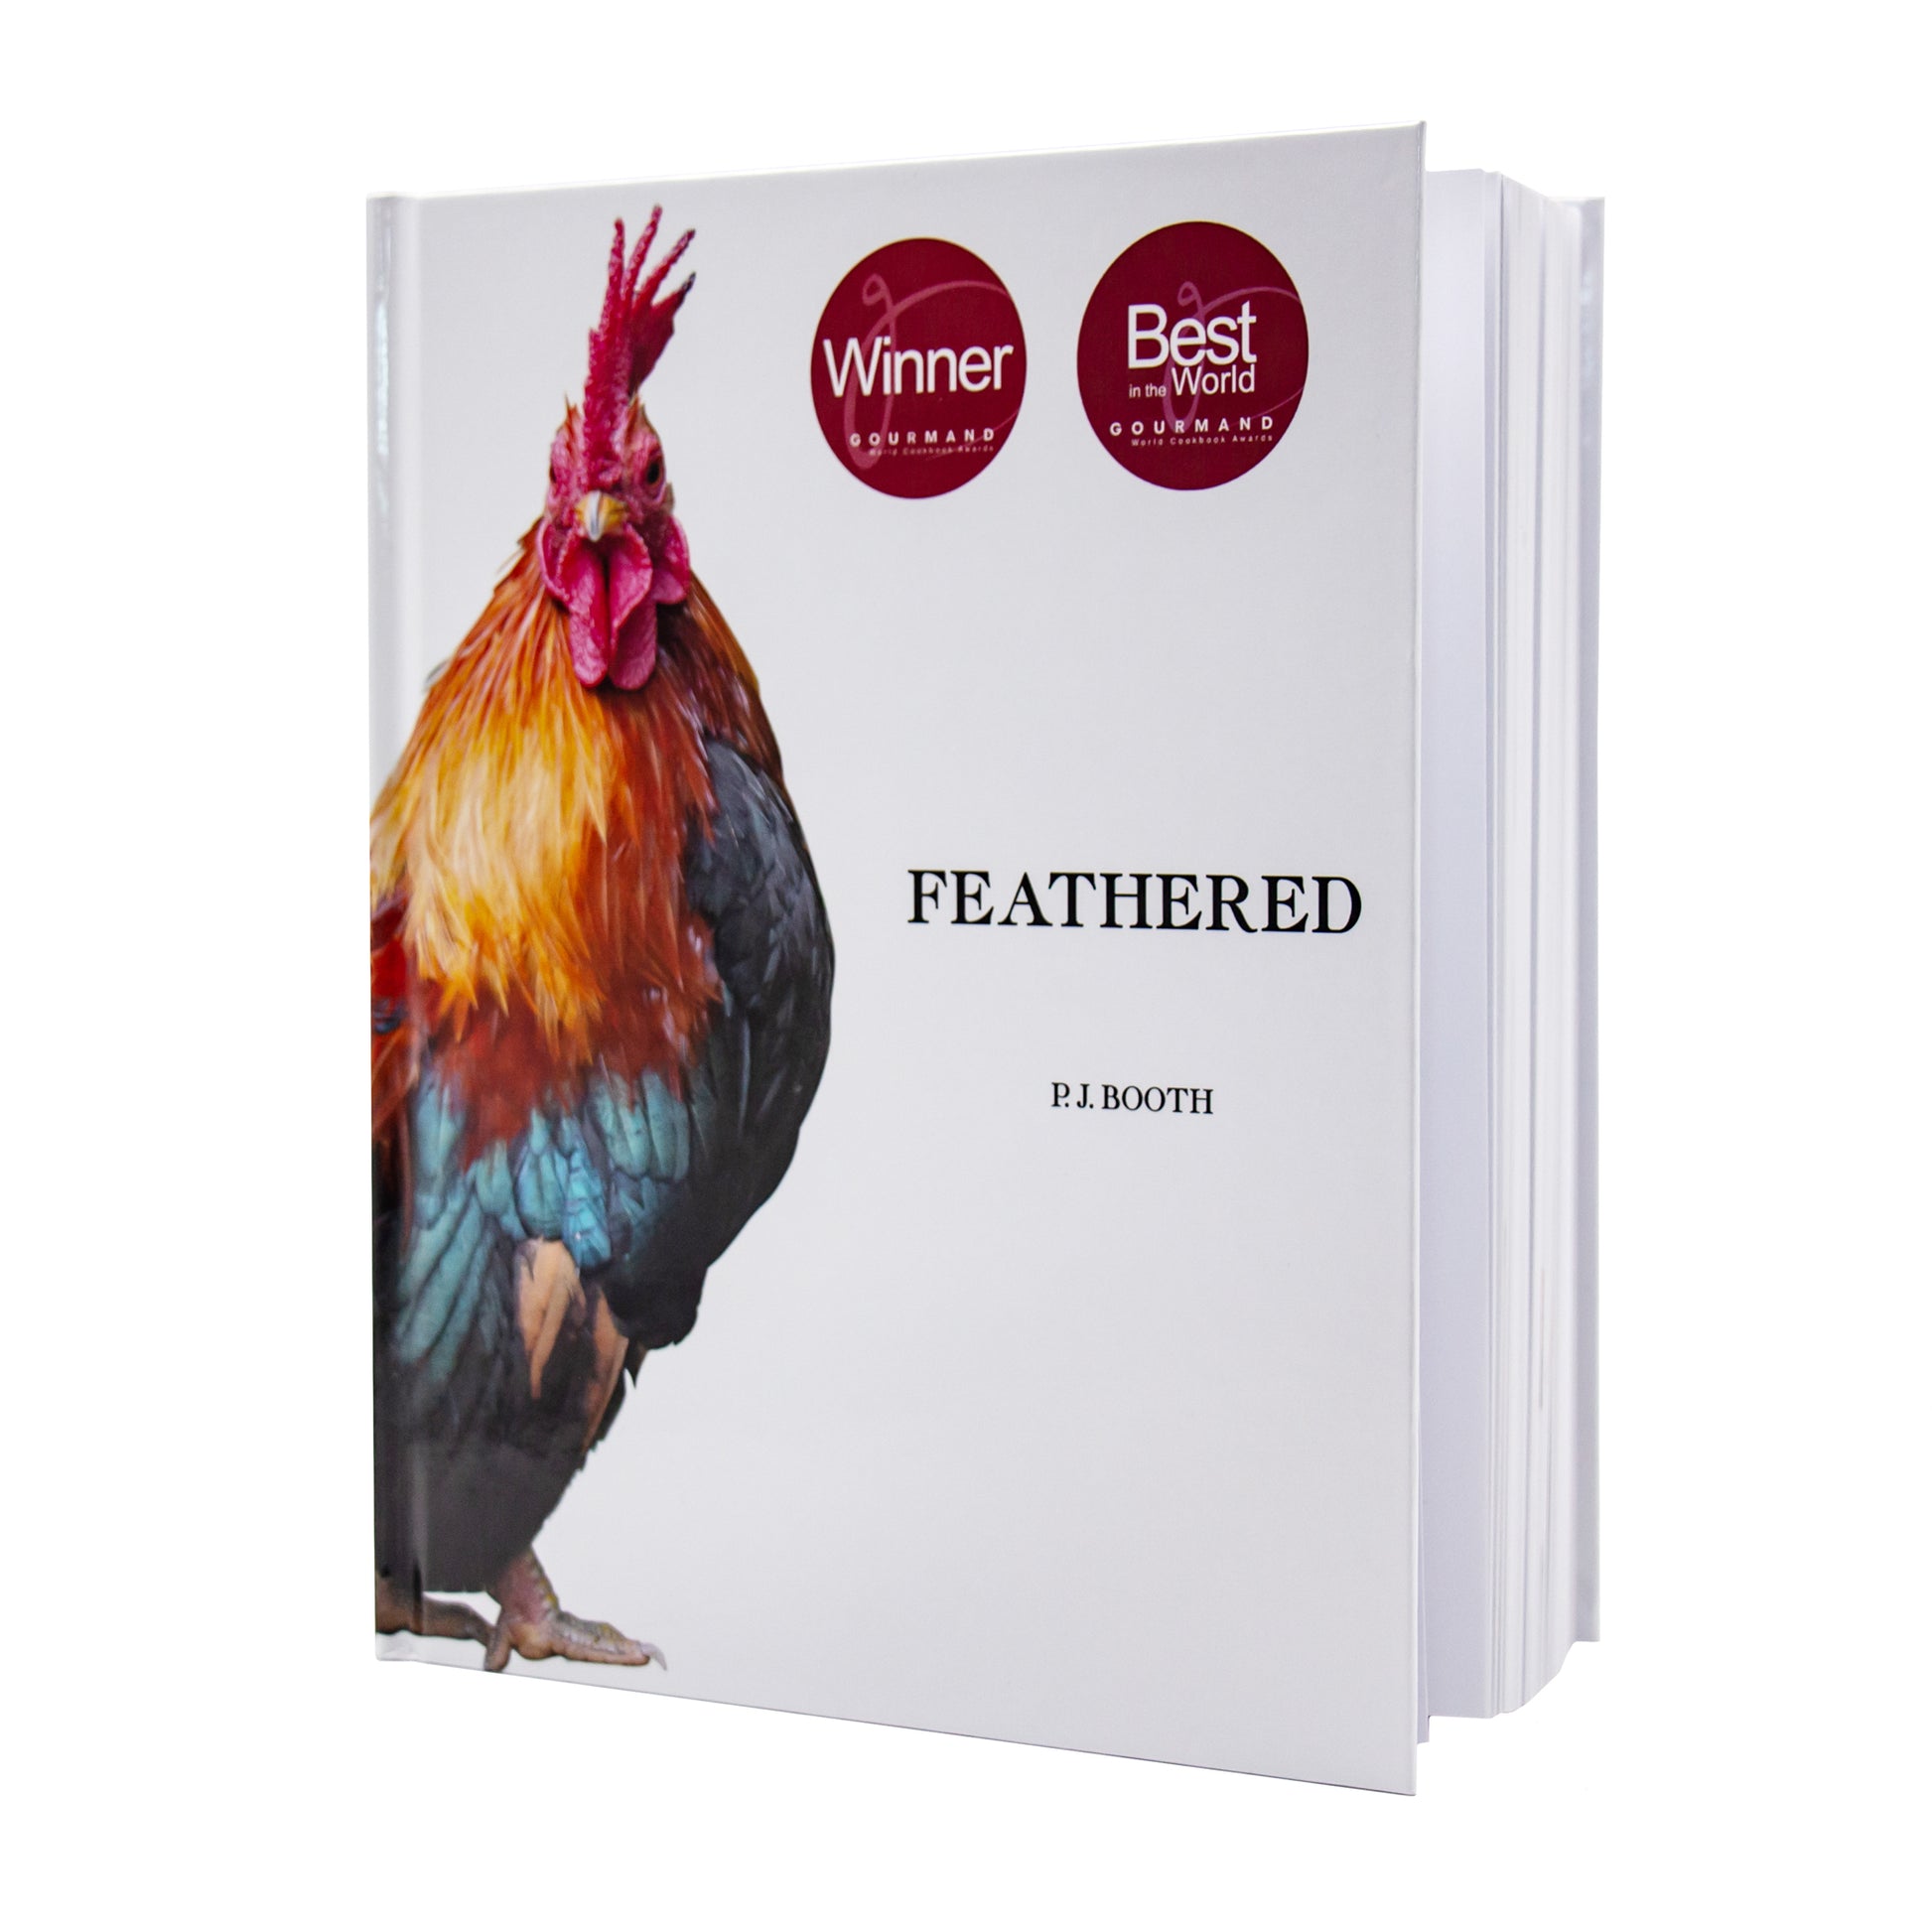 poultry cooking book by peter booth - feathered